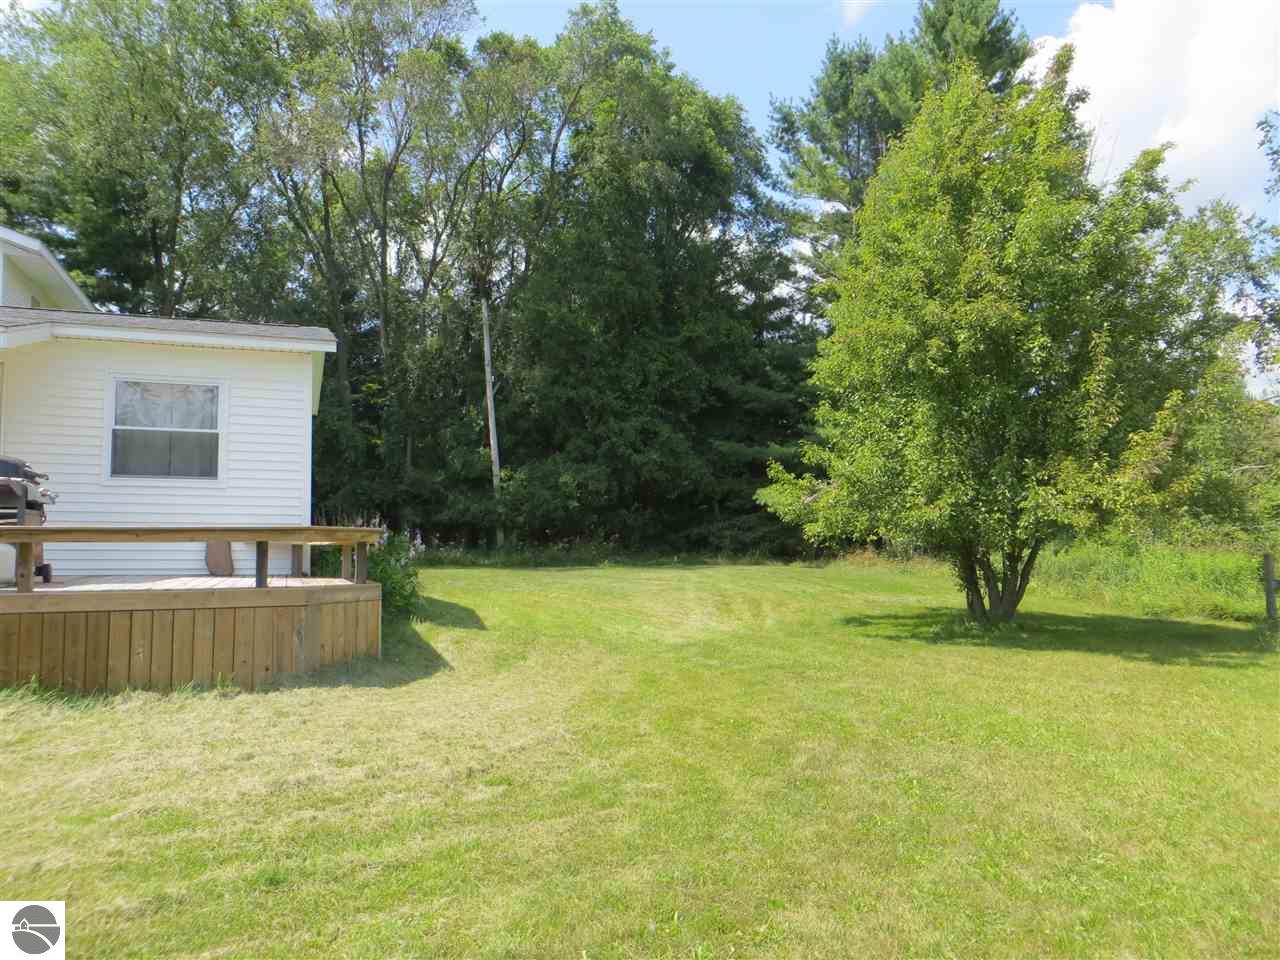 450 Old State Road, East Tawas, MI 48730 photo 67 of 68